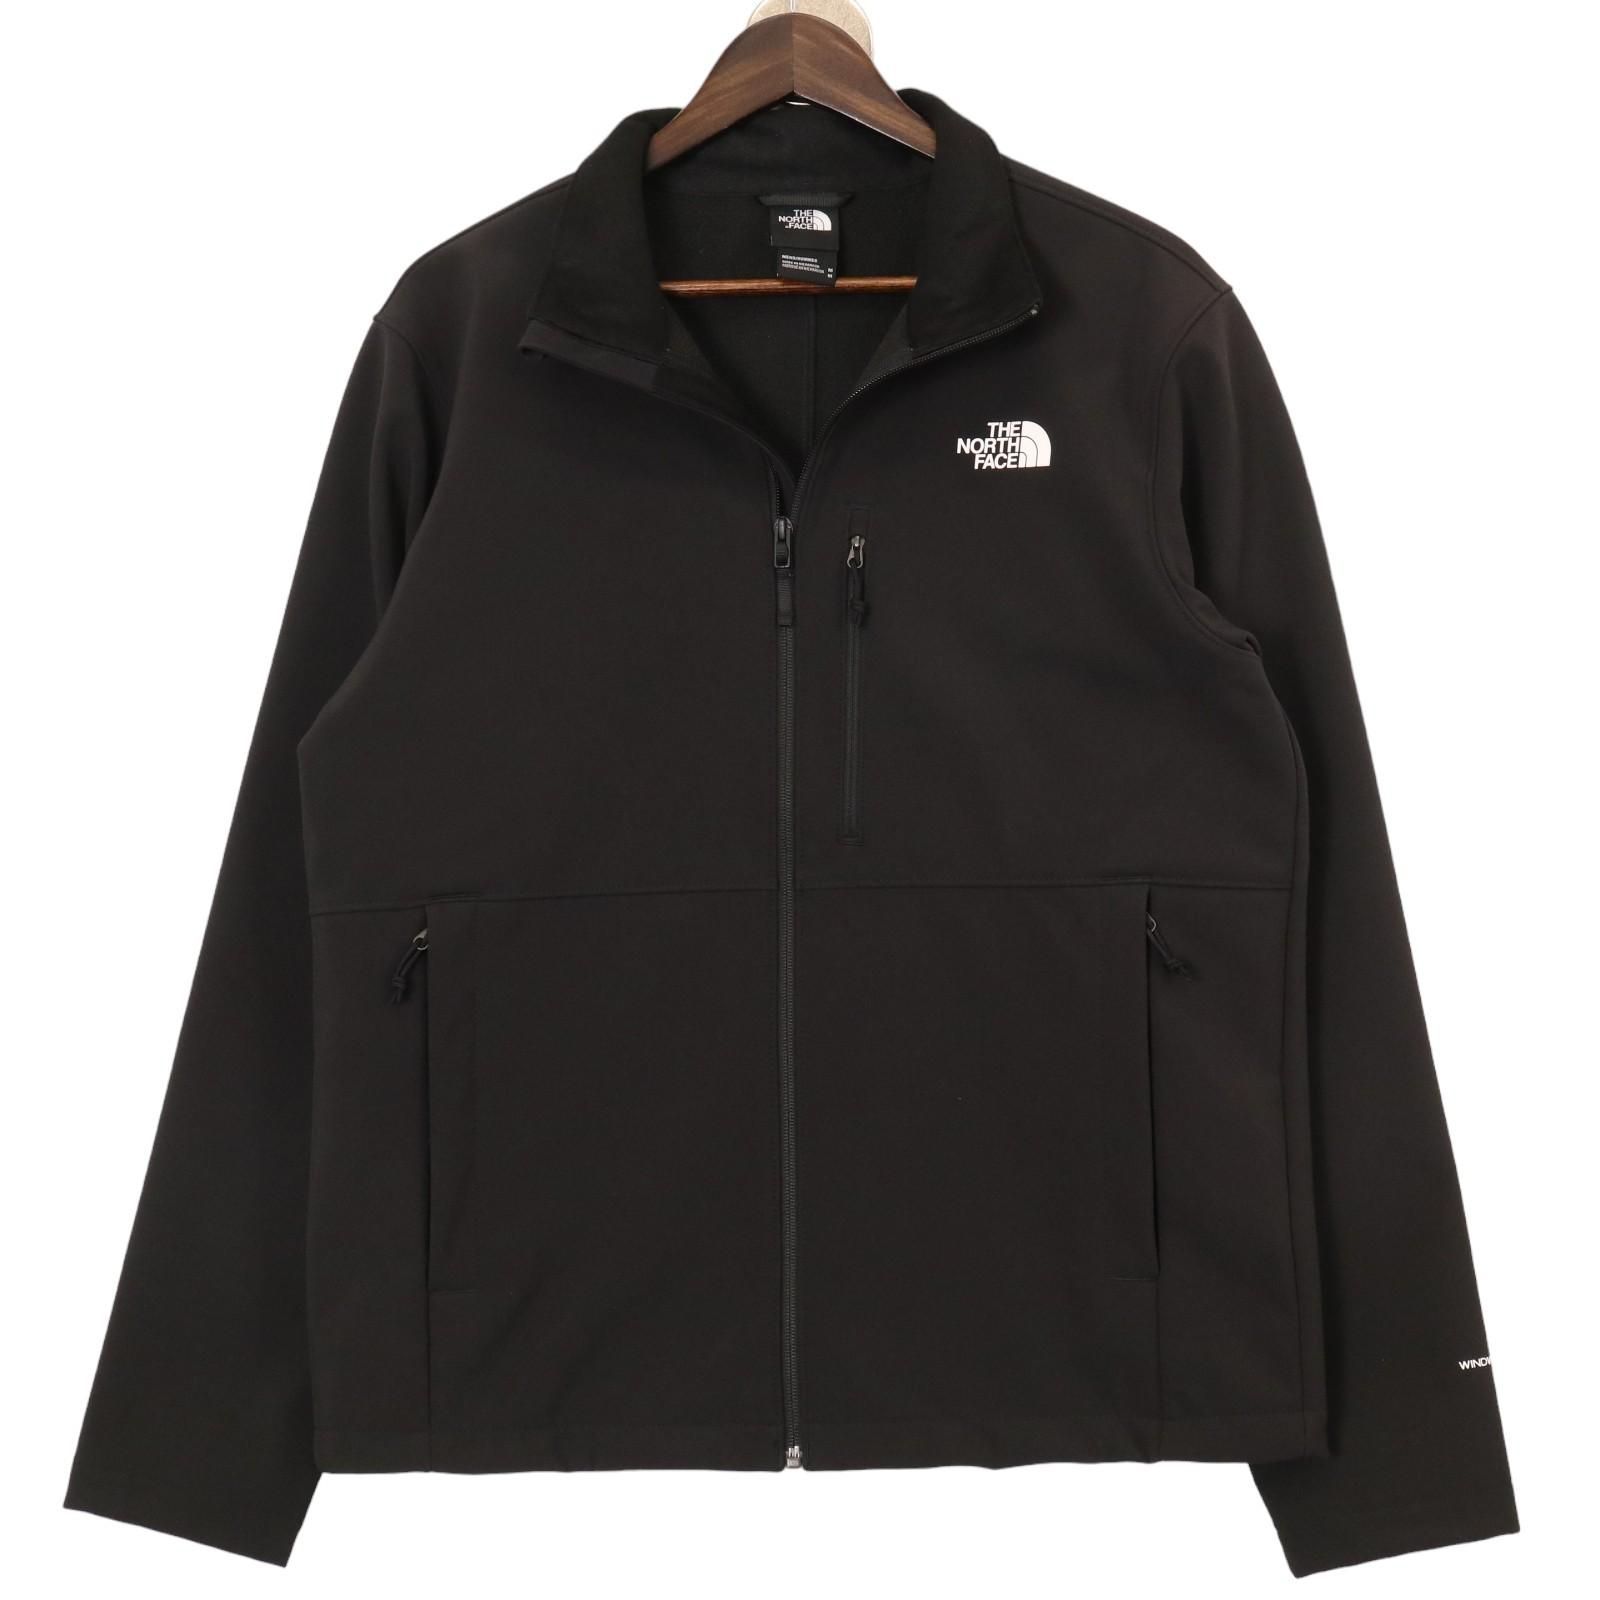 THE NORTH FACE ノースフェイス NP02201Z Apex Bionic Jacket